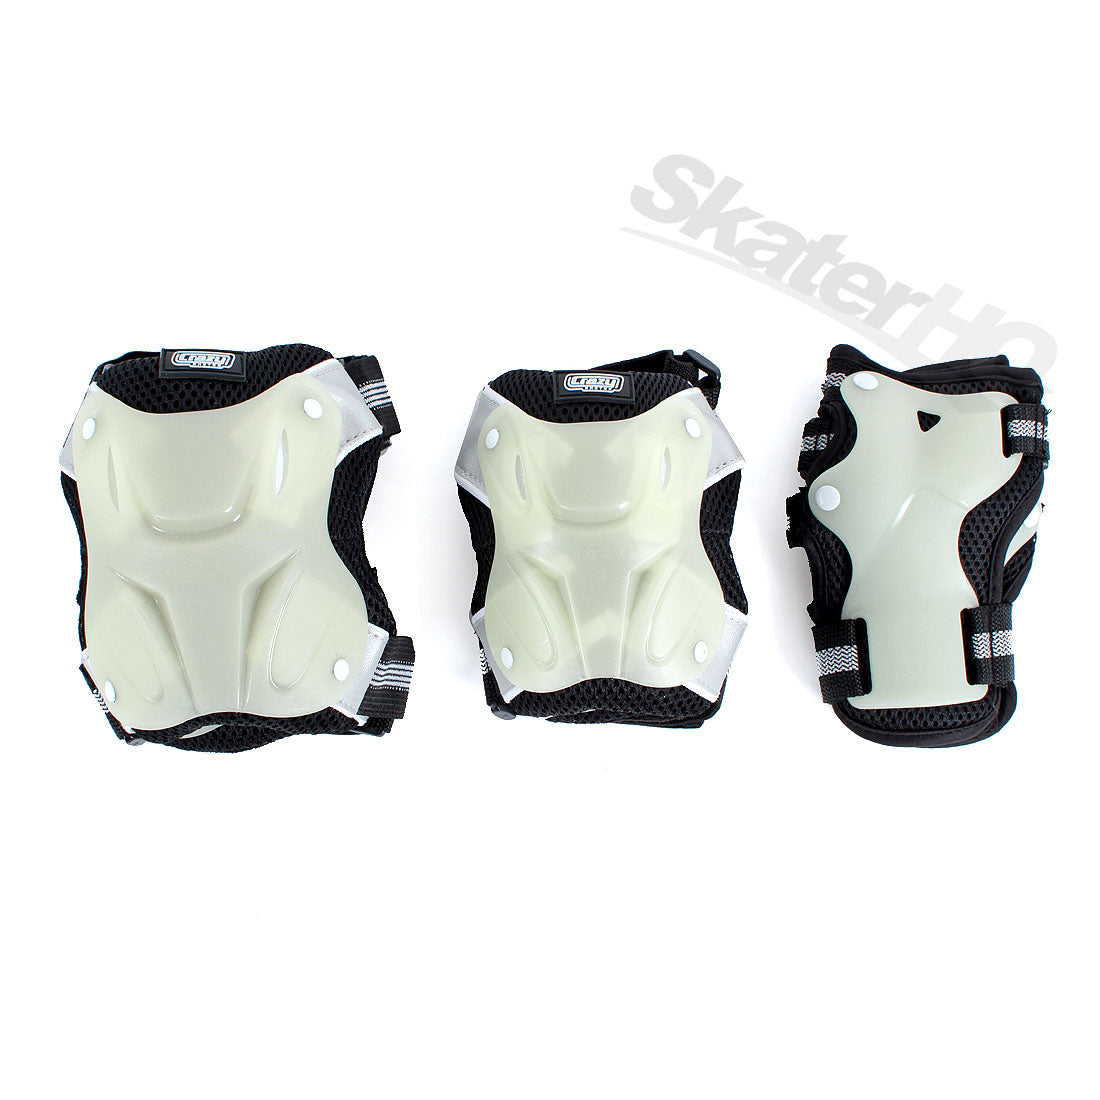 Crazy Glow Protective 3-Pack - Black - Large Protective Gear